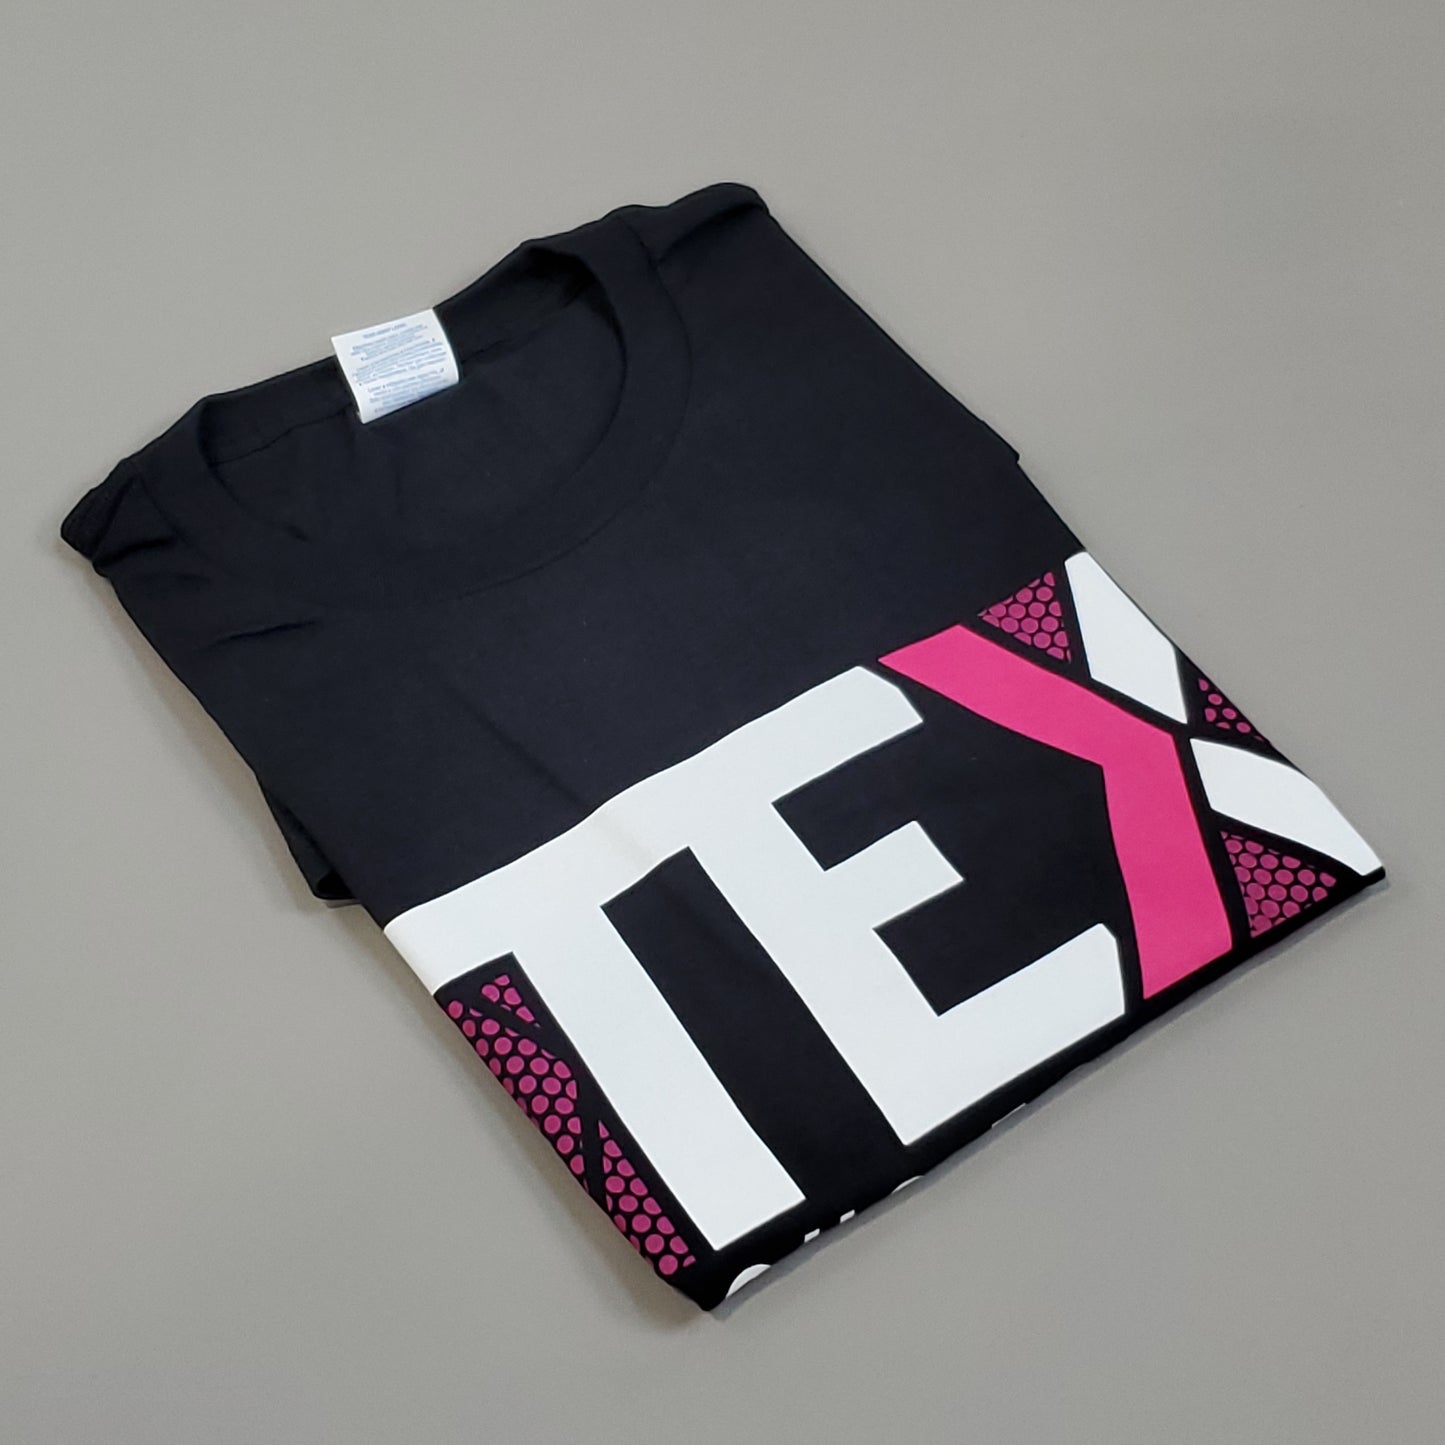 T-MOBILE Tee Shirt Short Sleeve TEX Famous For Care Men's Unisex Sz XL Black/Pink (New)